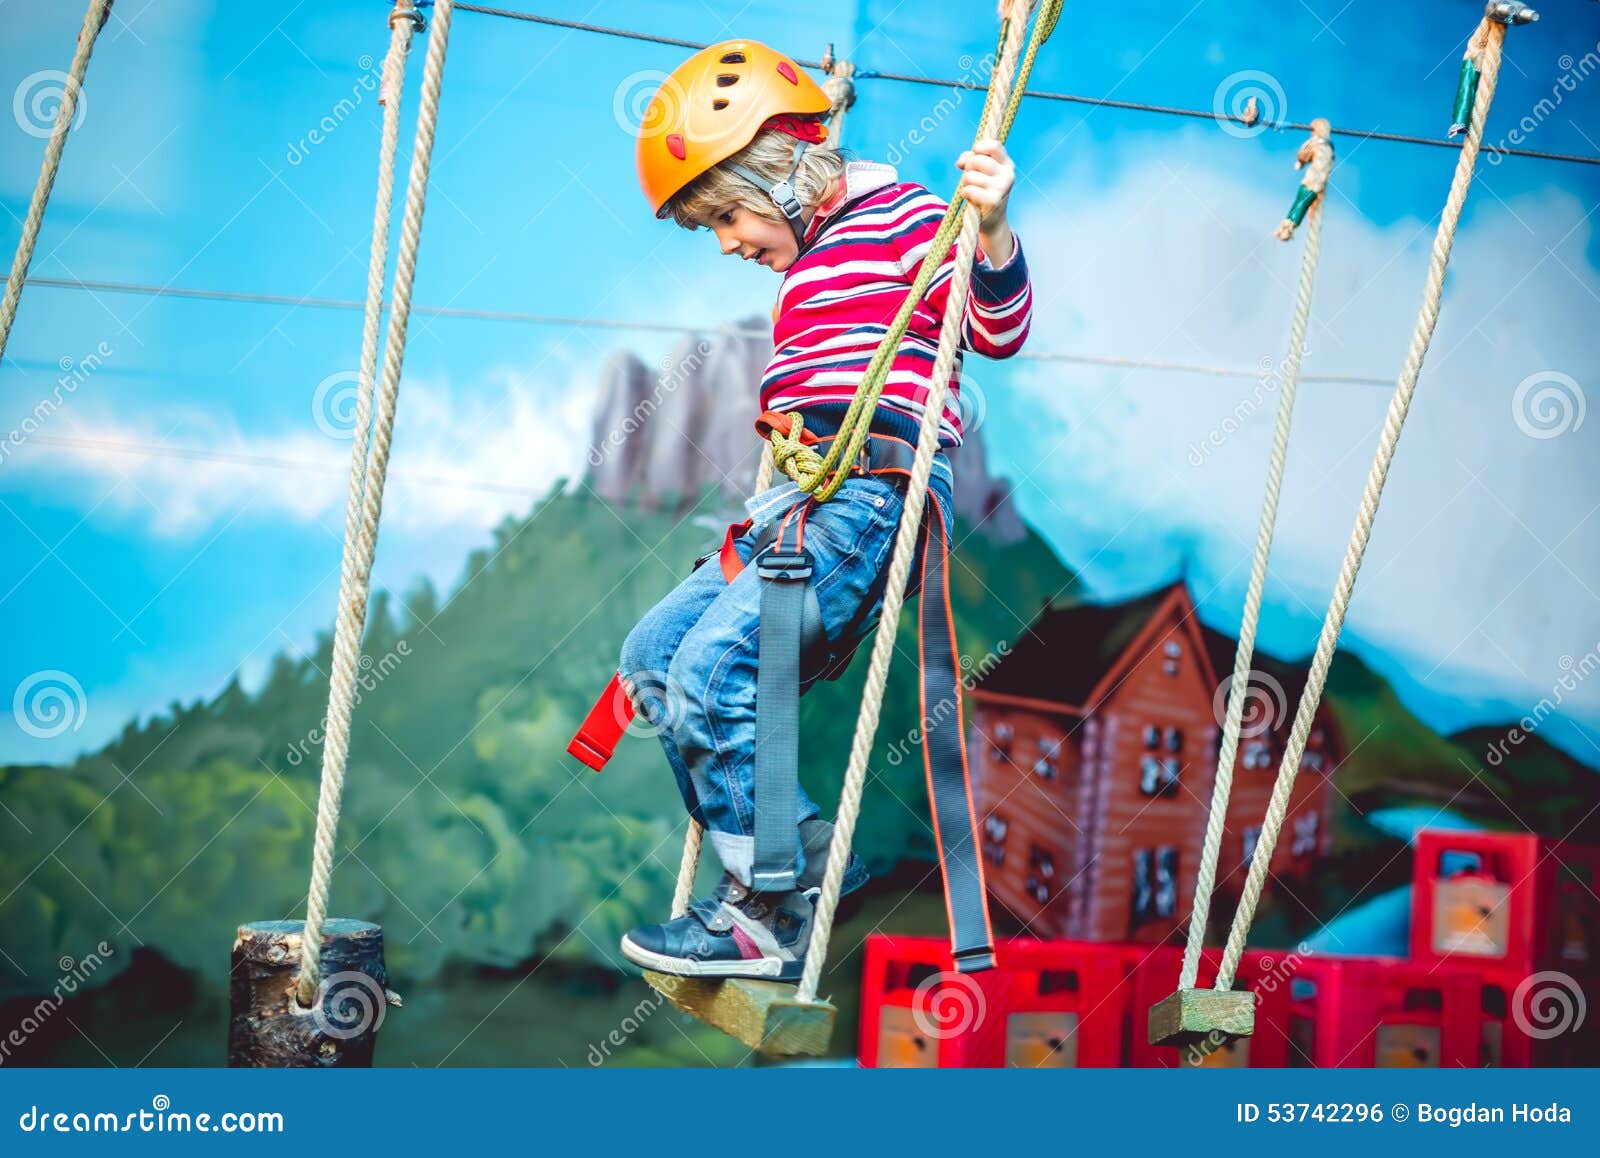 kid having a good time and having fun at an adventure playground with diferent activities. happy childhood concept